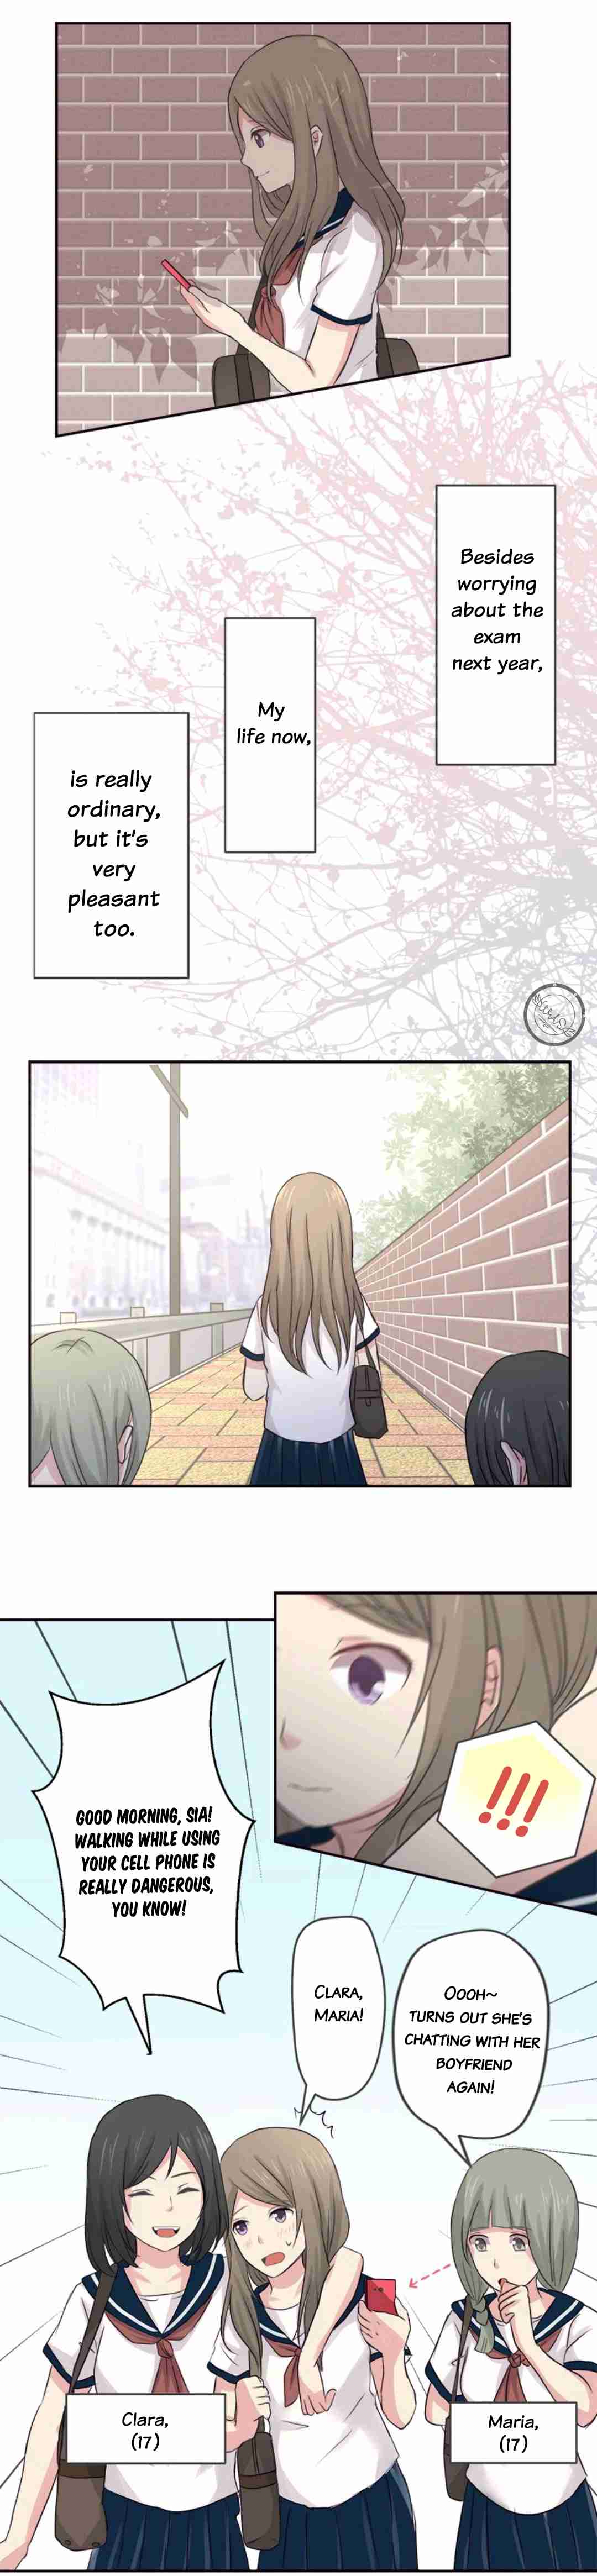 Switched Girls Ch. 1